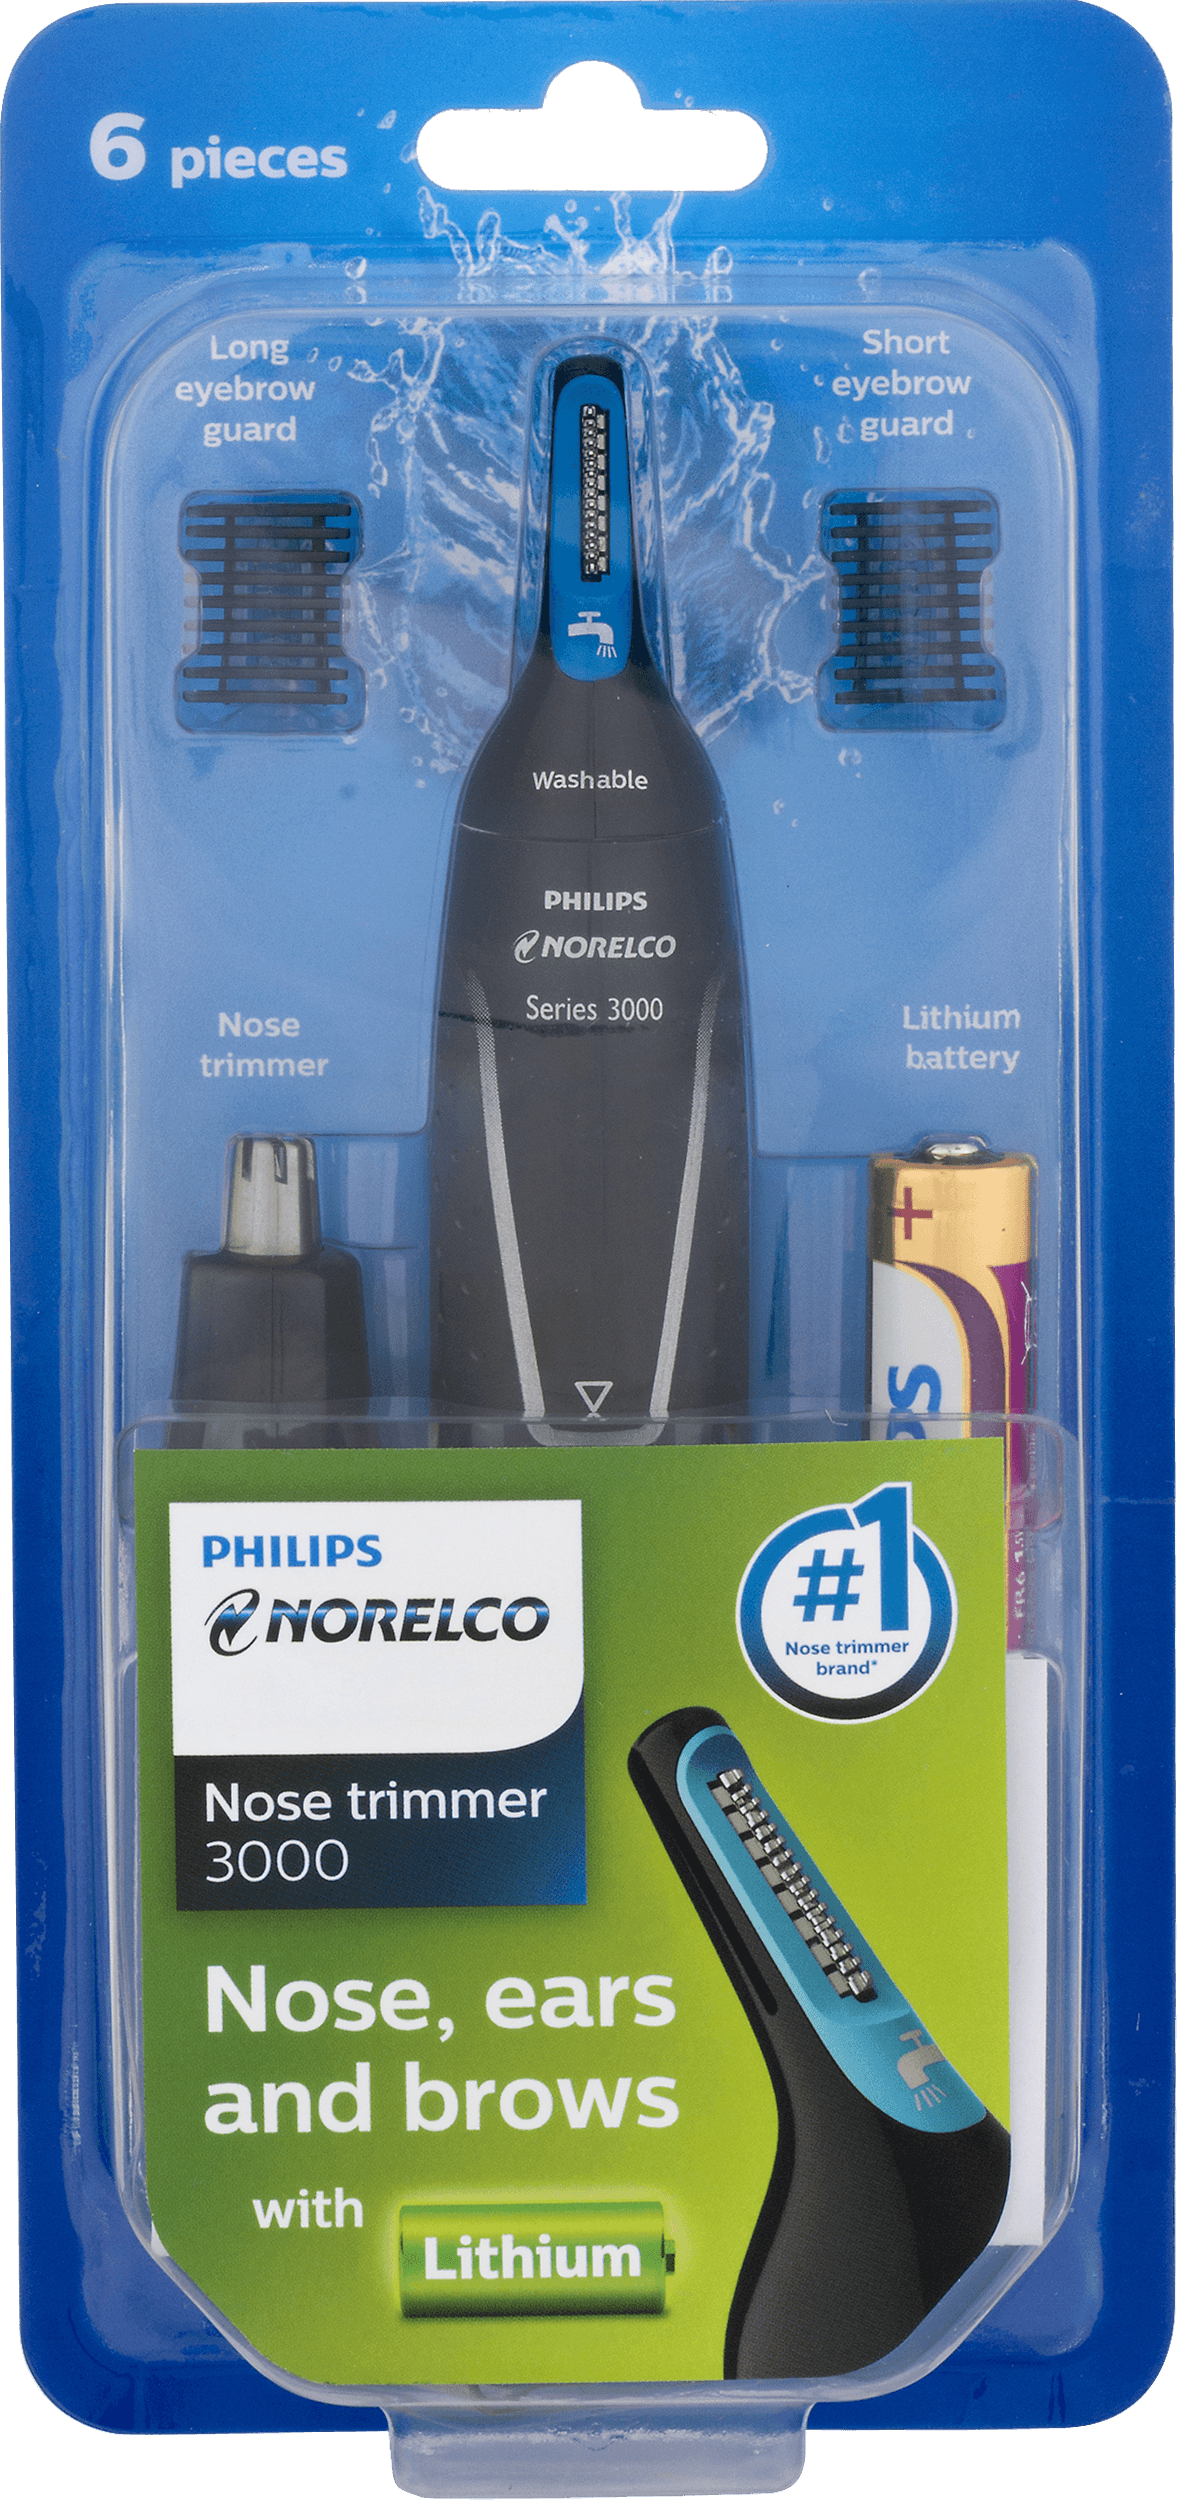 Philips Norelco Nose trimmer 3000, NT3000/49, with 6 pieces for nose, ears and eyebrows - image 4 of 12